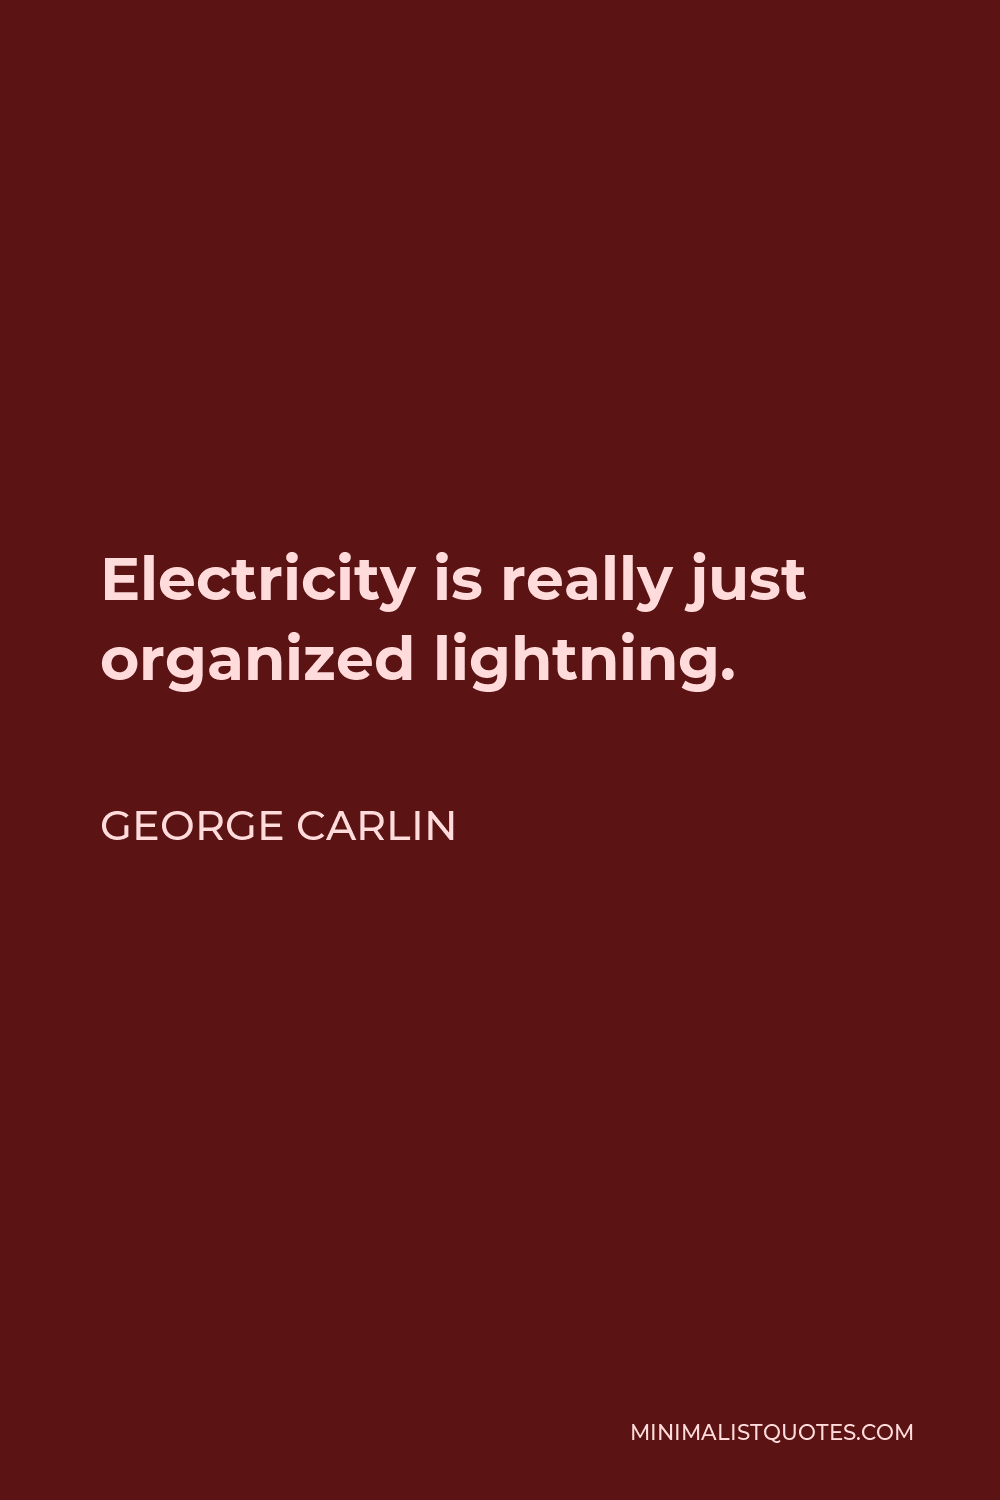 George Carlin Quote - Electricity is really just organized lightning.